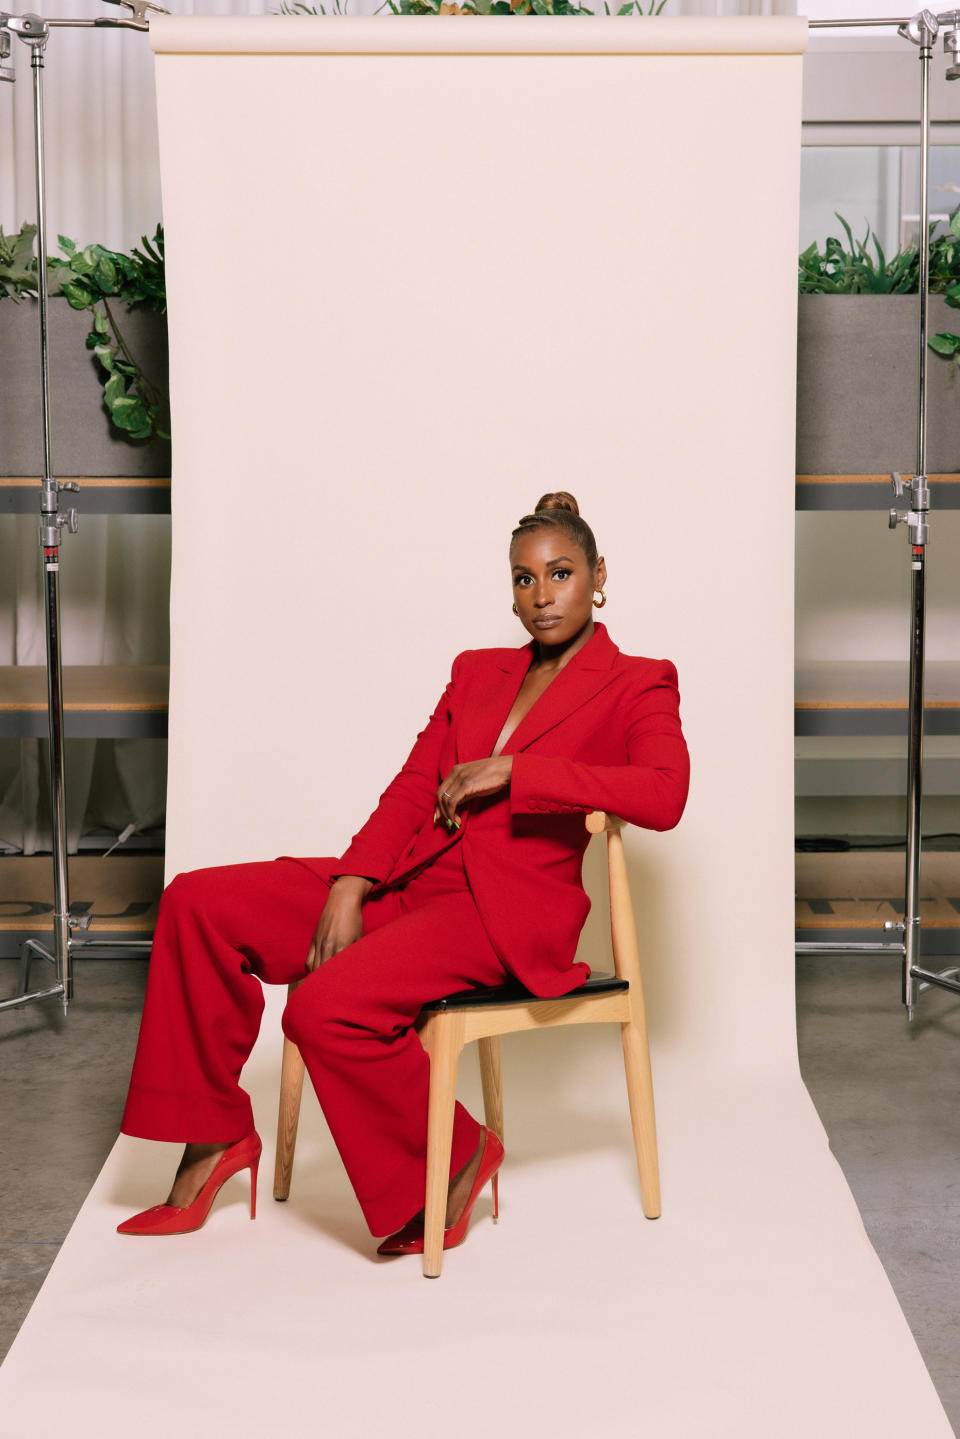 Photo of Issa Rae in Los Angeles, California. (Raven B. Varona for TODAY)